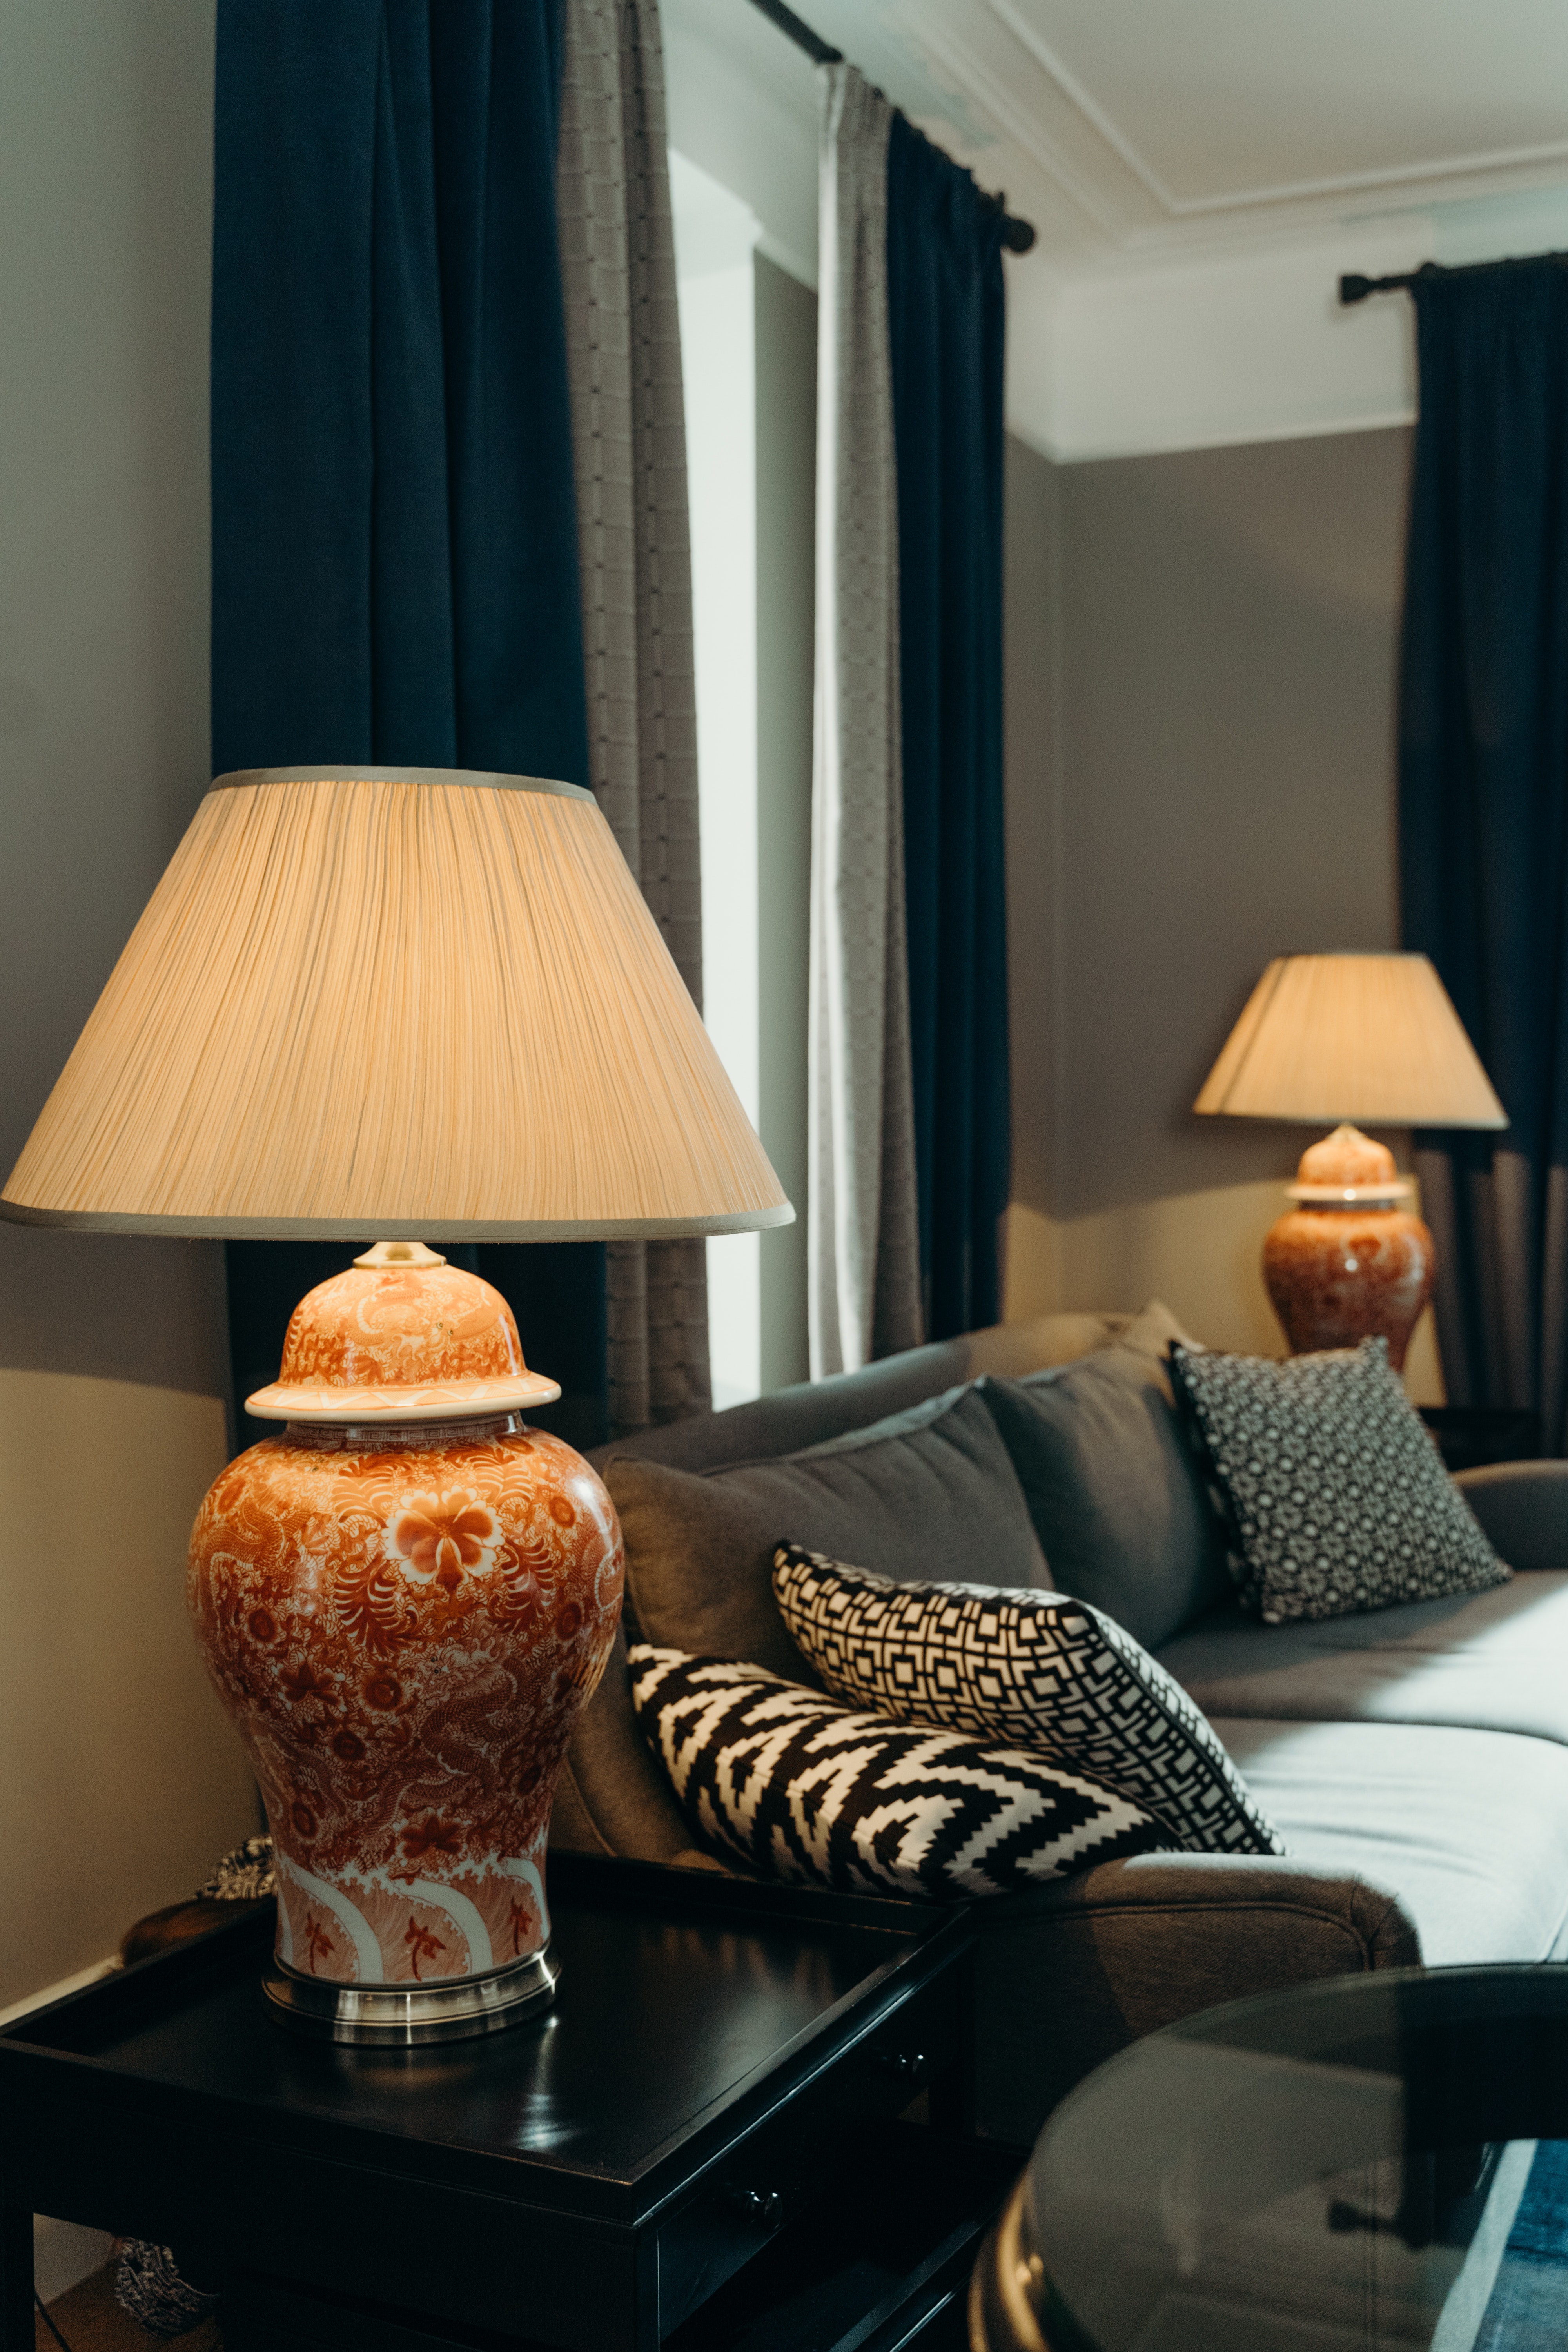 Custom-designed lampshades for antique side table lamps made of red china, and custom-designed blackout drapes in blue and silver next to a hotel couch. 